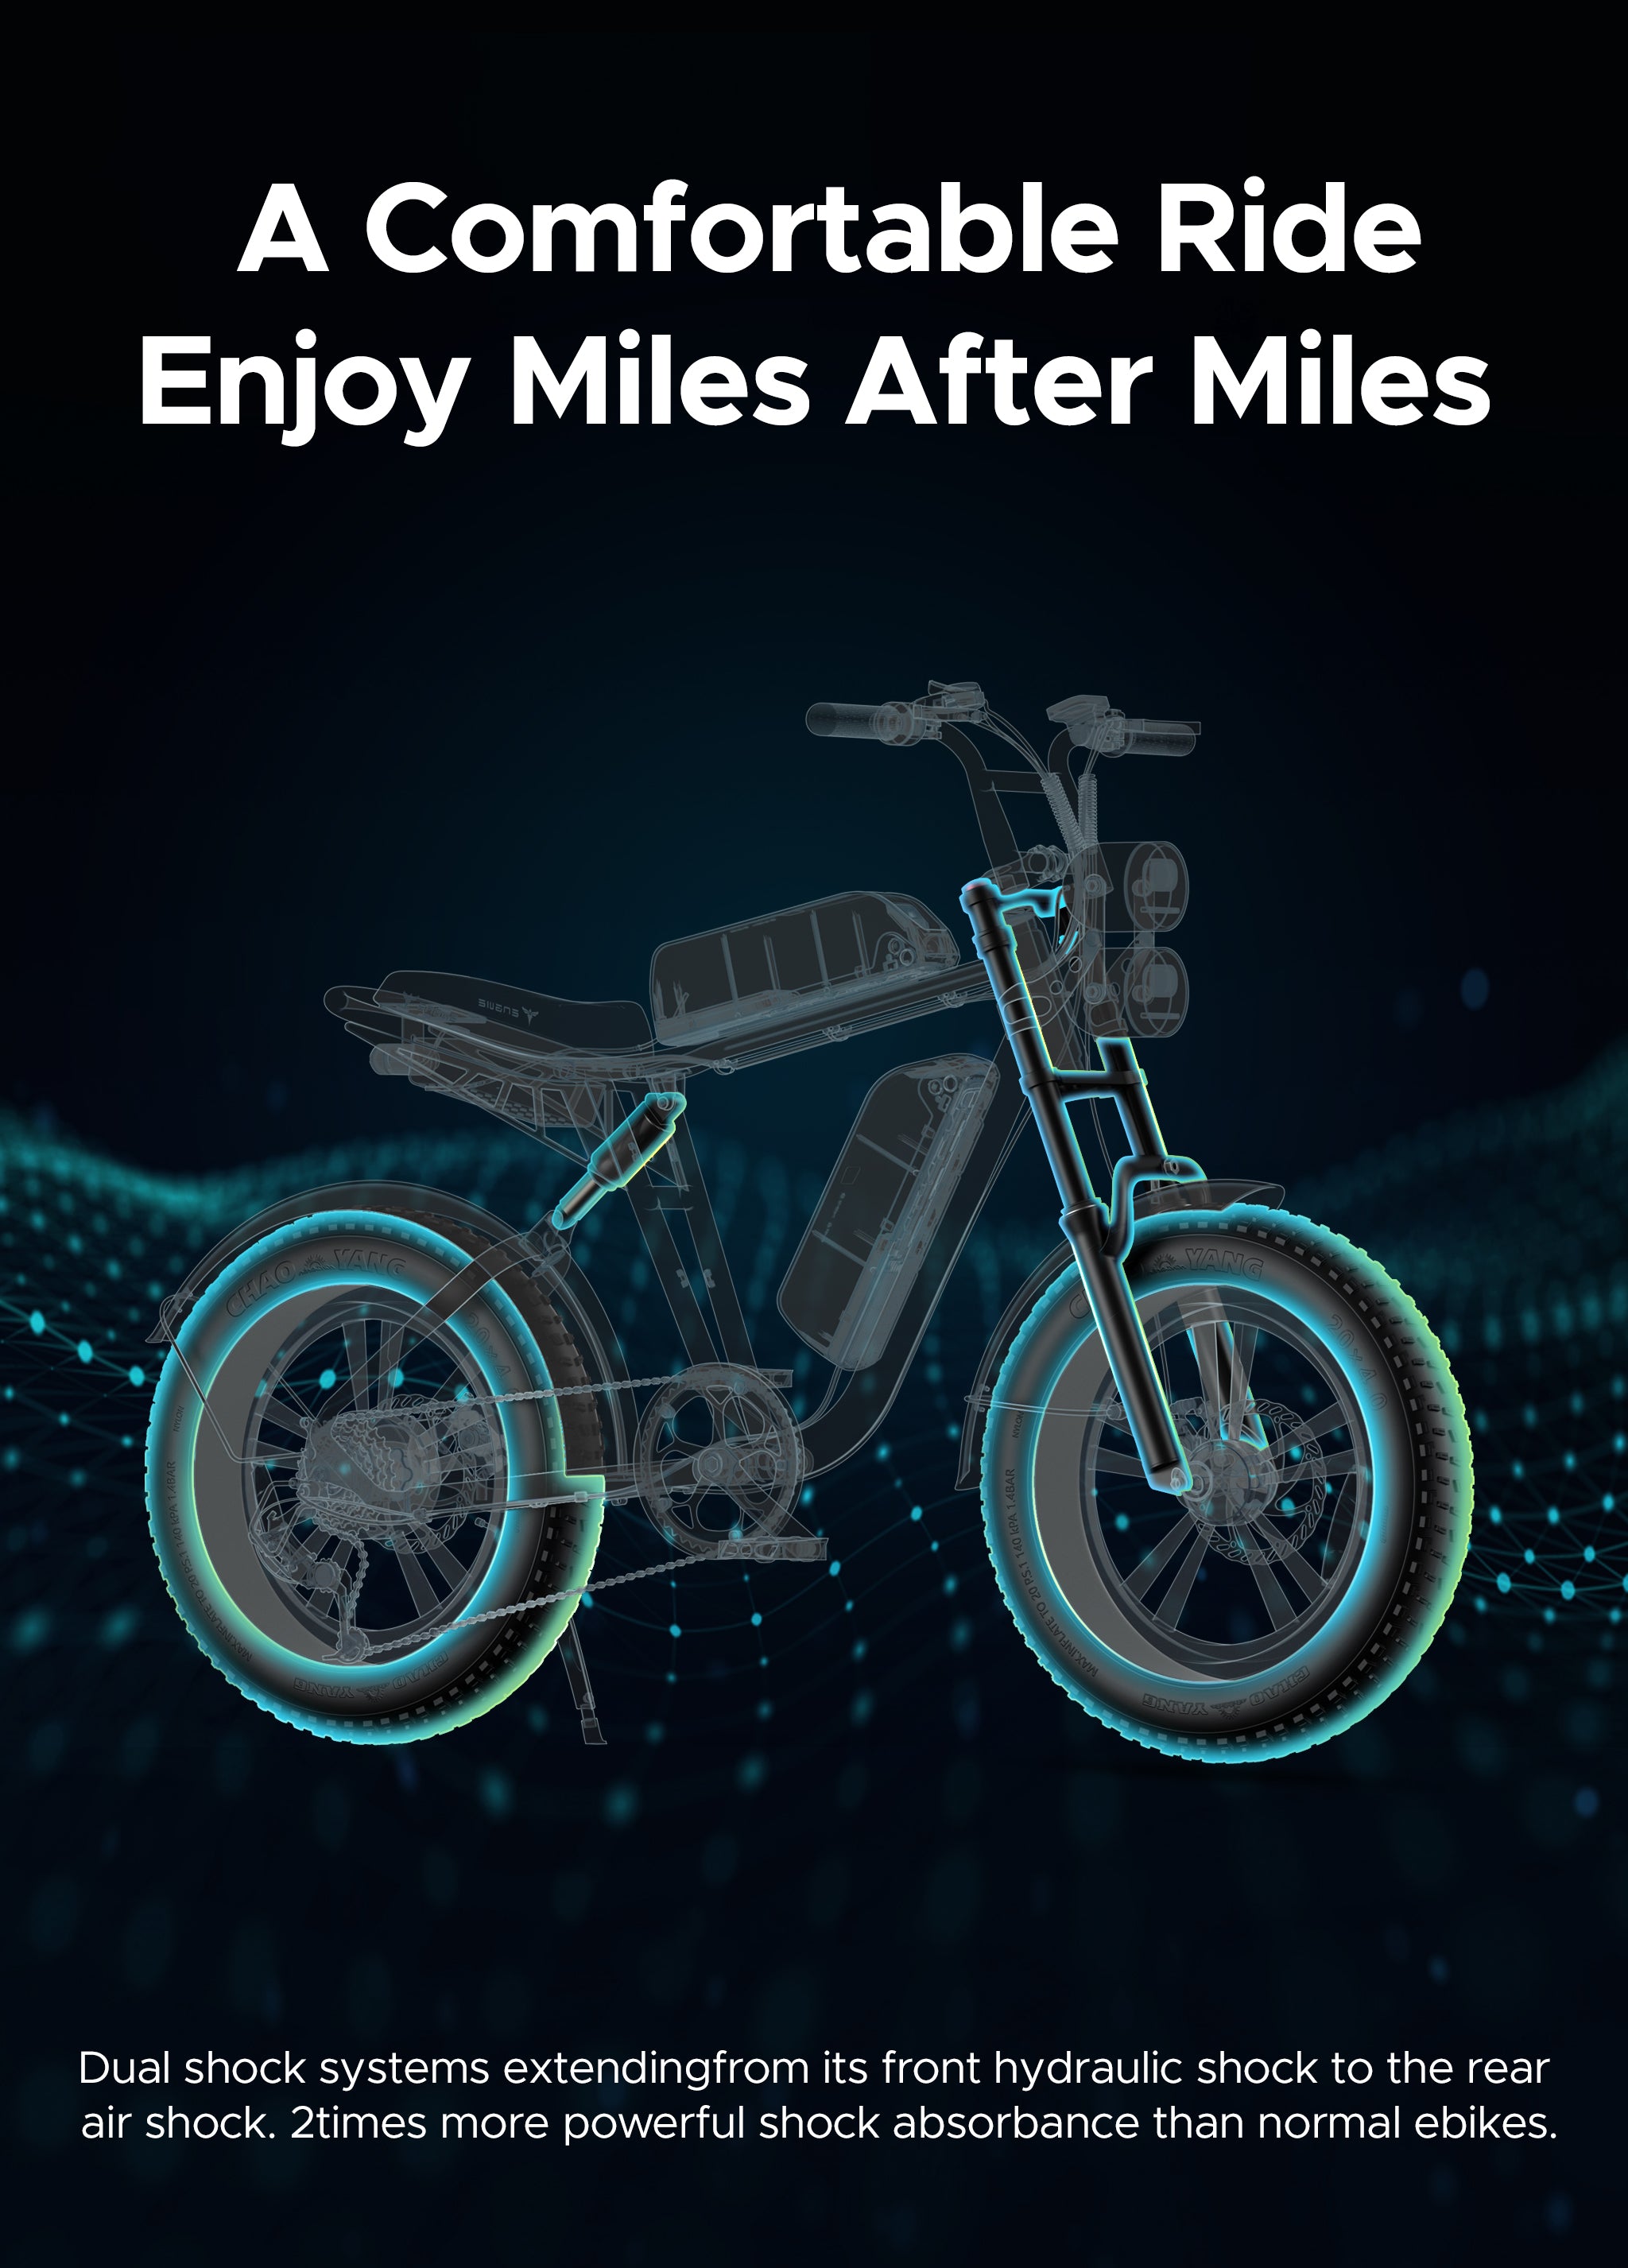 the dual shock systems of engwe m20 e-bike